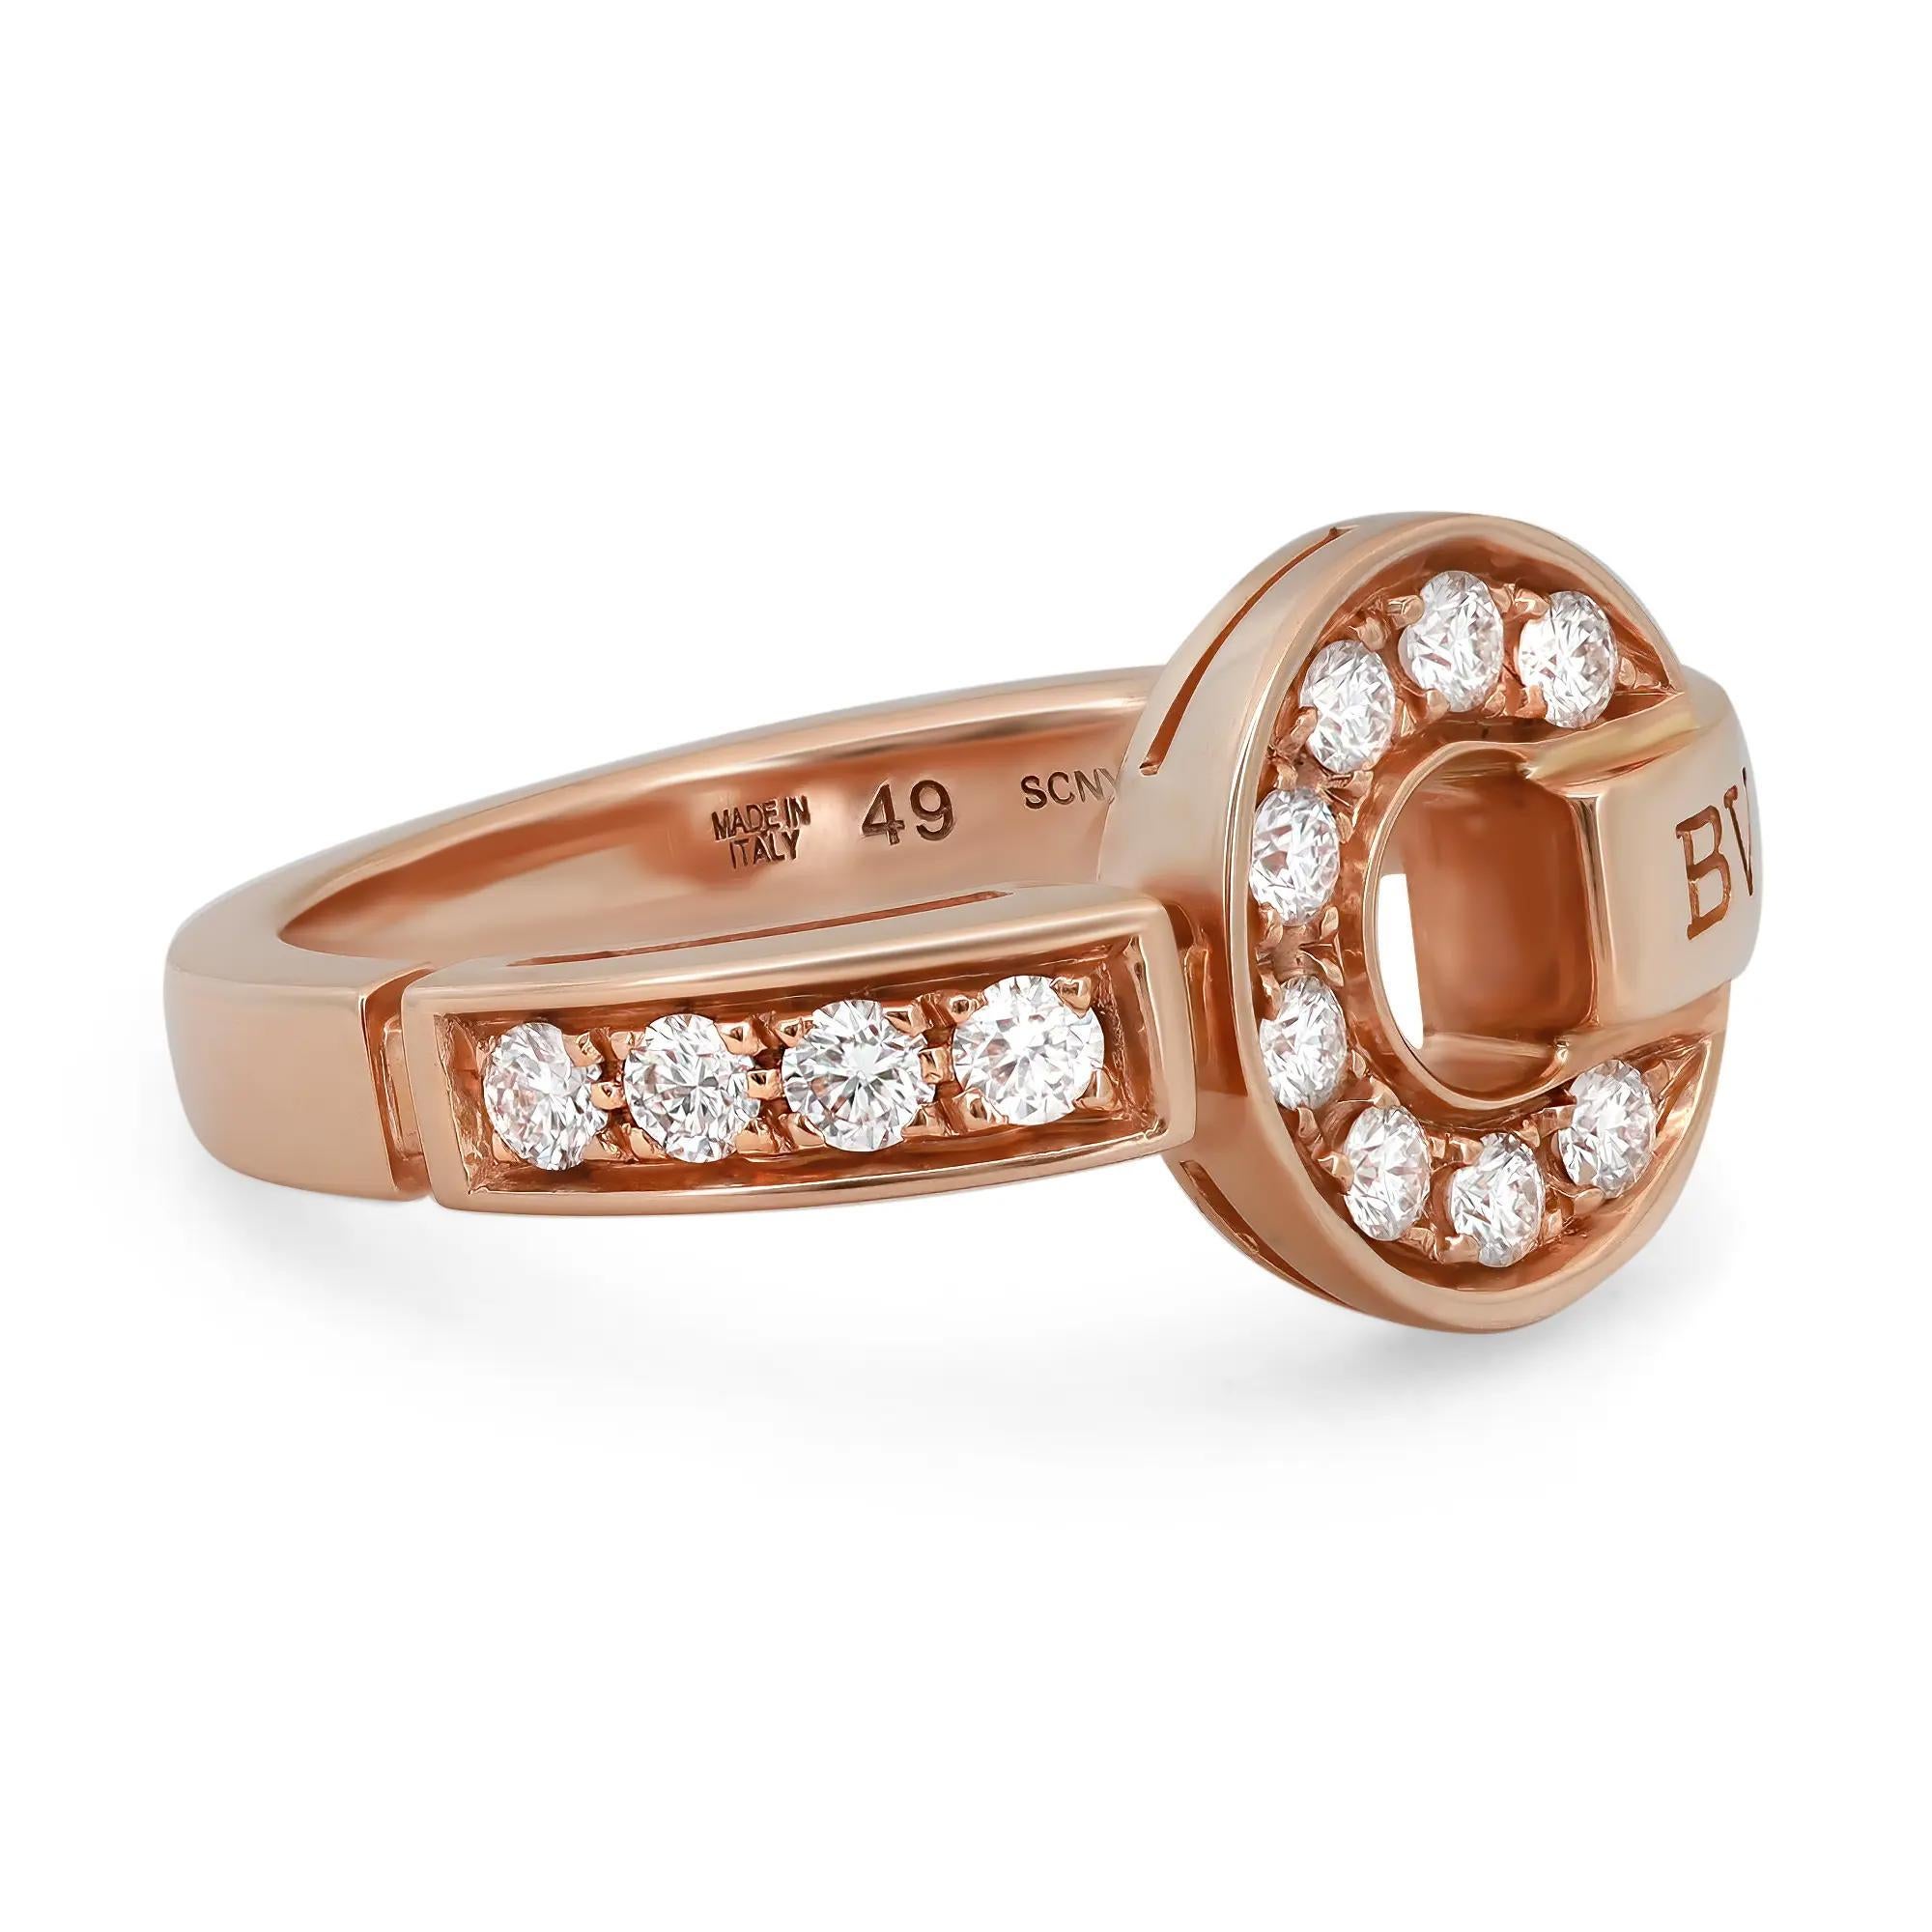 An elegant fusion of culture and modernity, this BVLGARI BVLGARI ring is a contemporary statement of classiness. It features the BVLGARI logo on one band shoulder with round brilliant cut diamonds studded in the circular openwork design in the